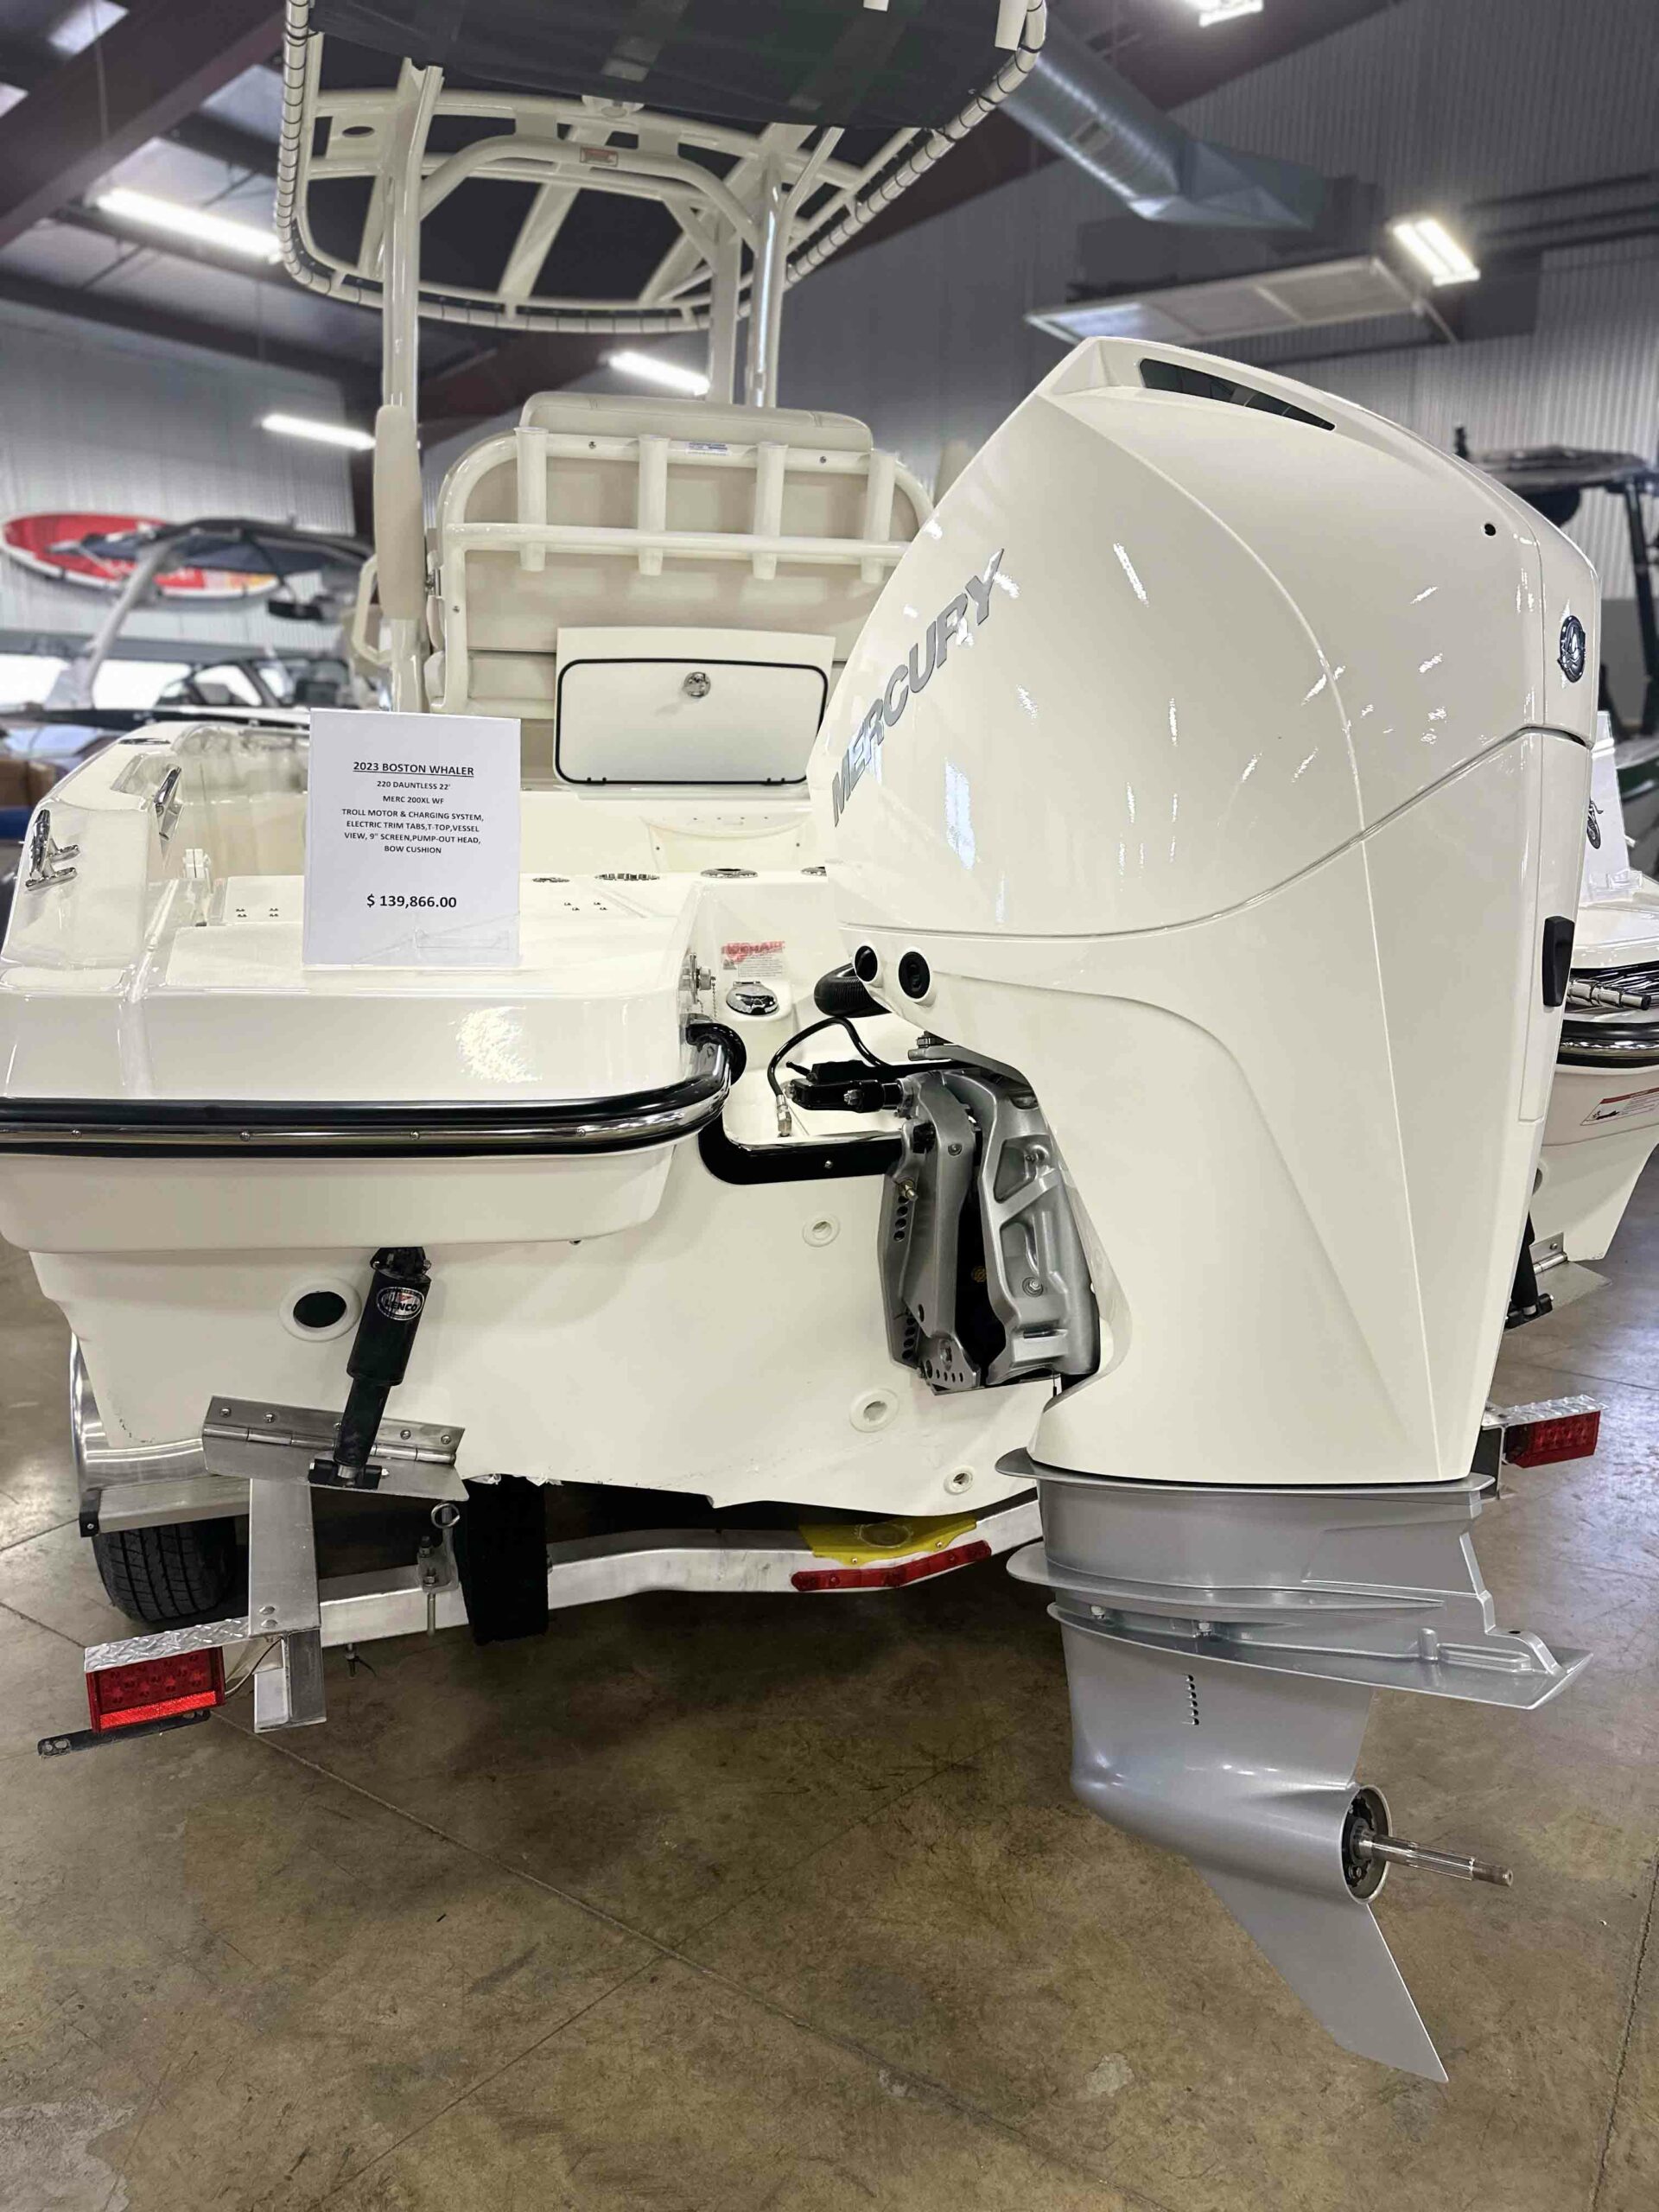 This is the Mercury engine of a 2023 Boston Whaler 220 Dauntless.